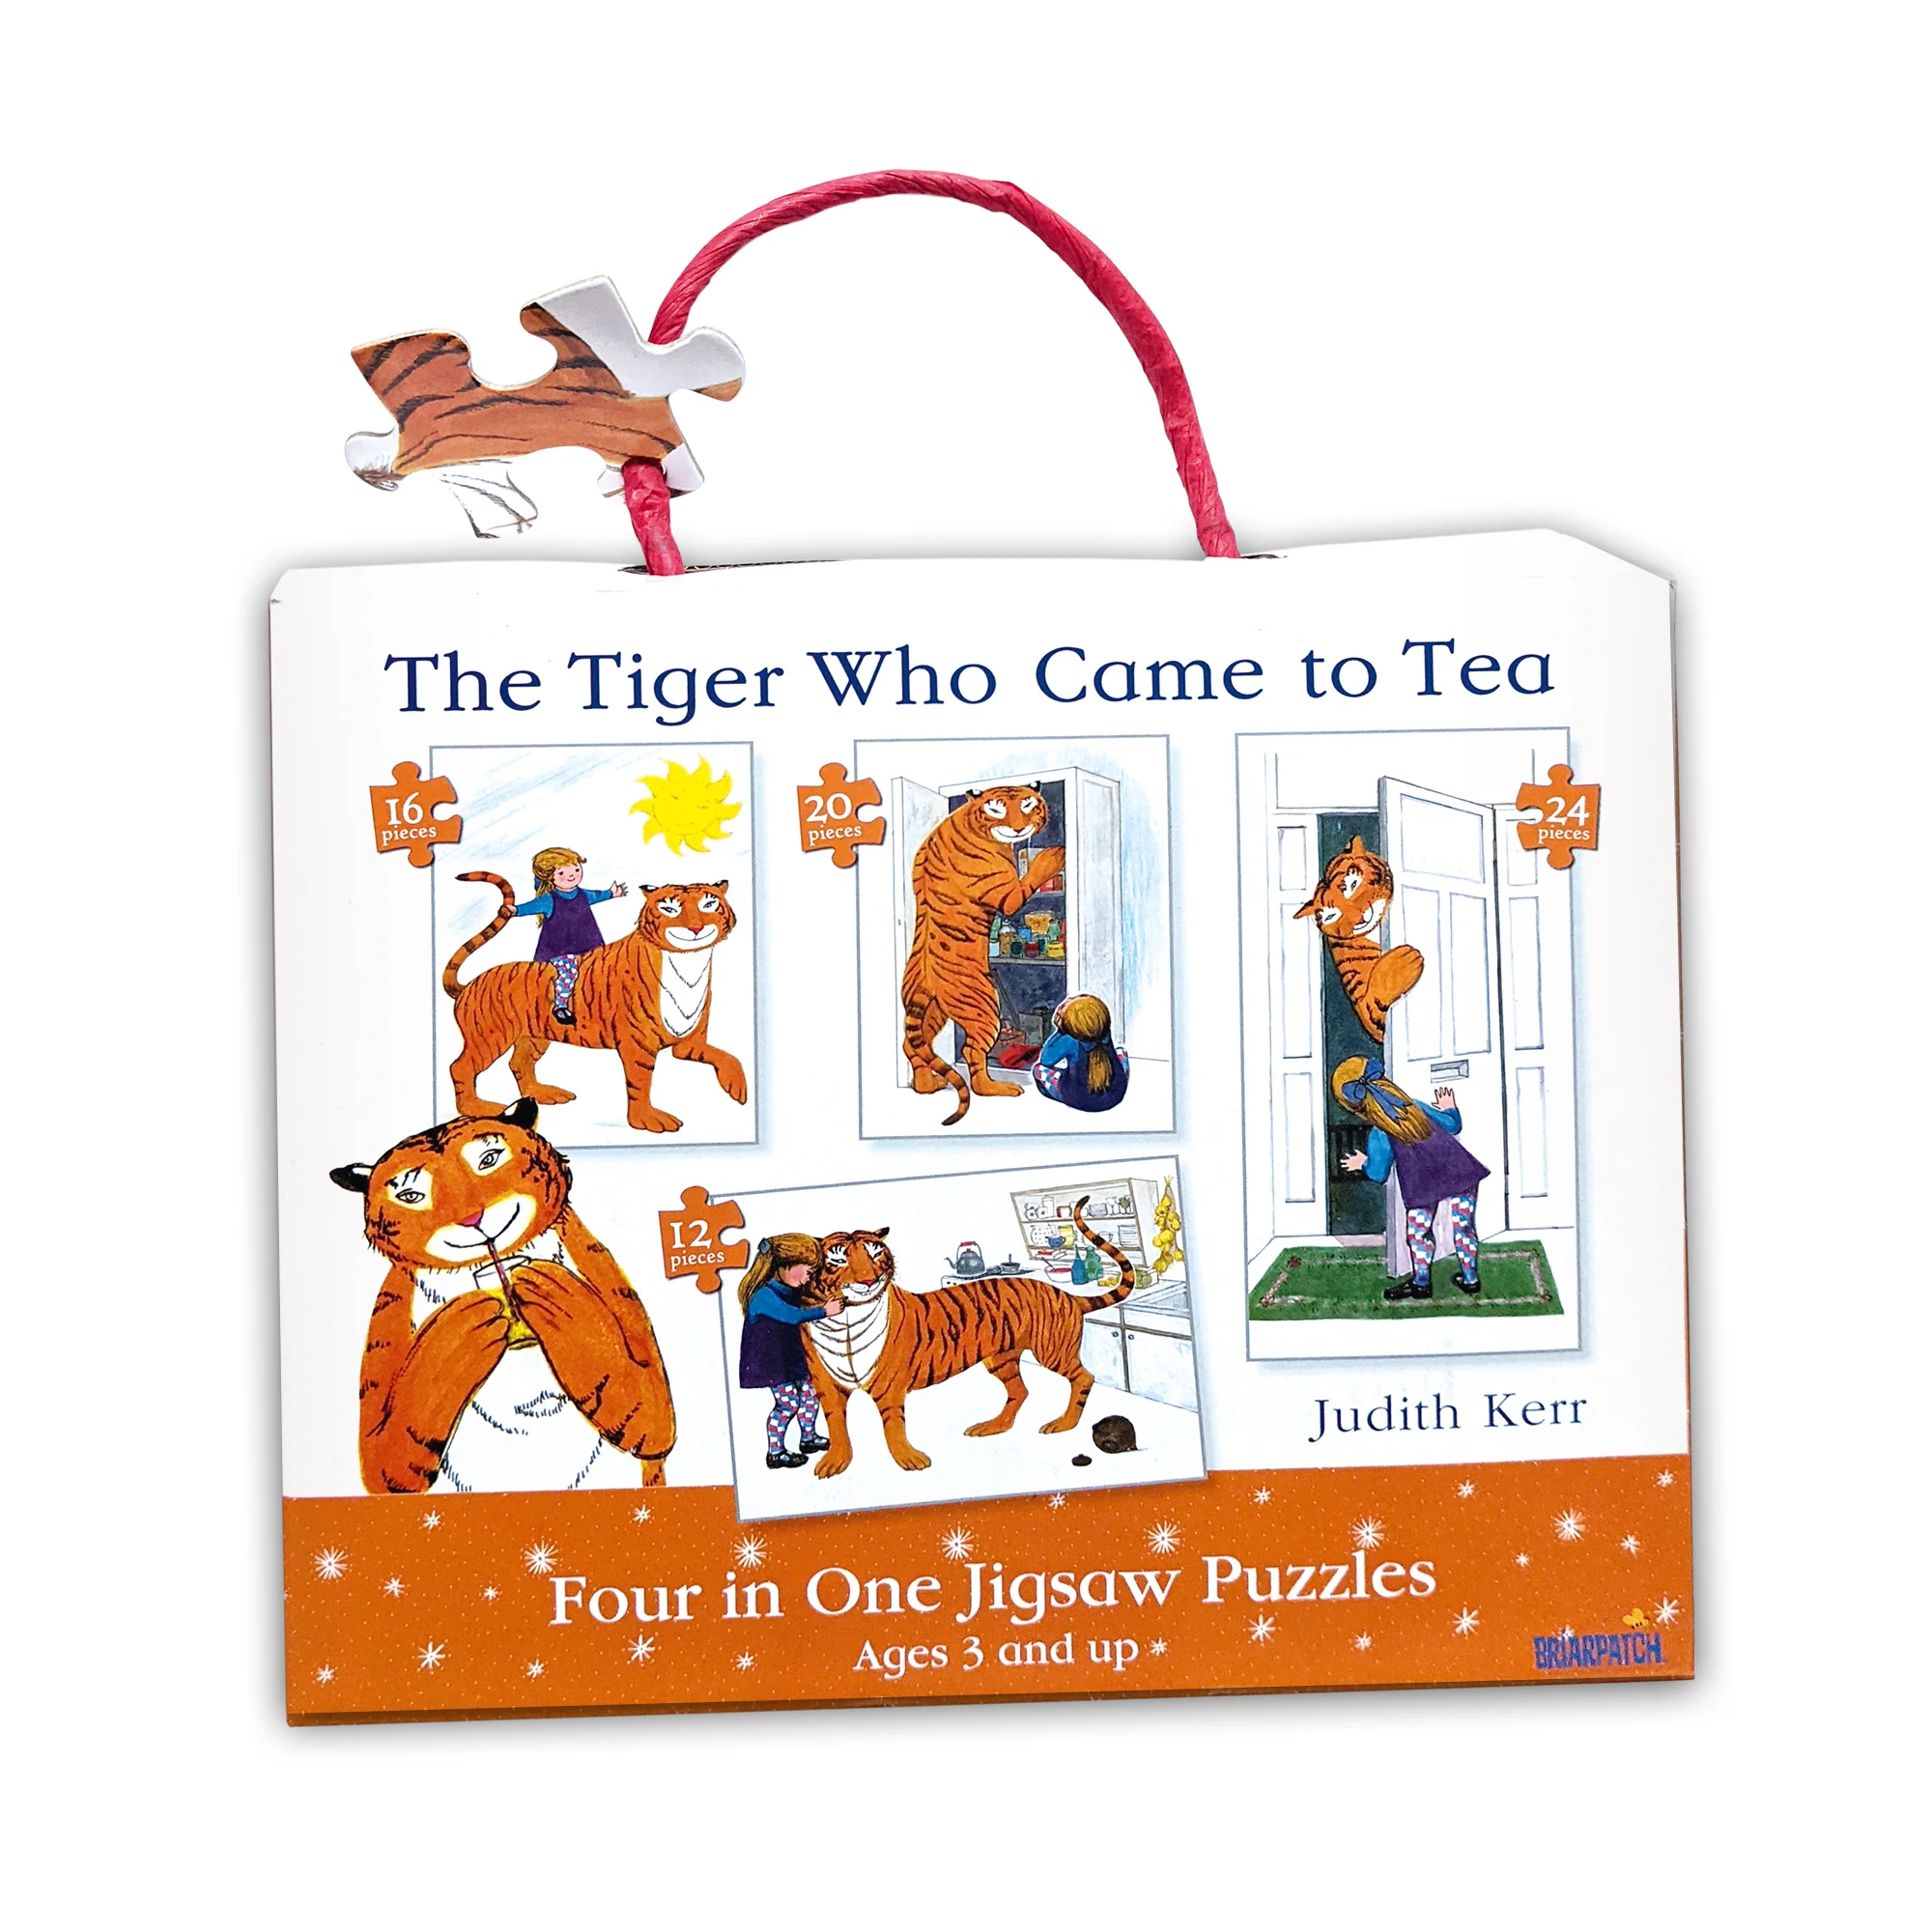 The Tiger Who Came to Tea 4 in 1 Jigsaw Puzzle